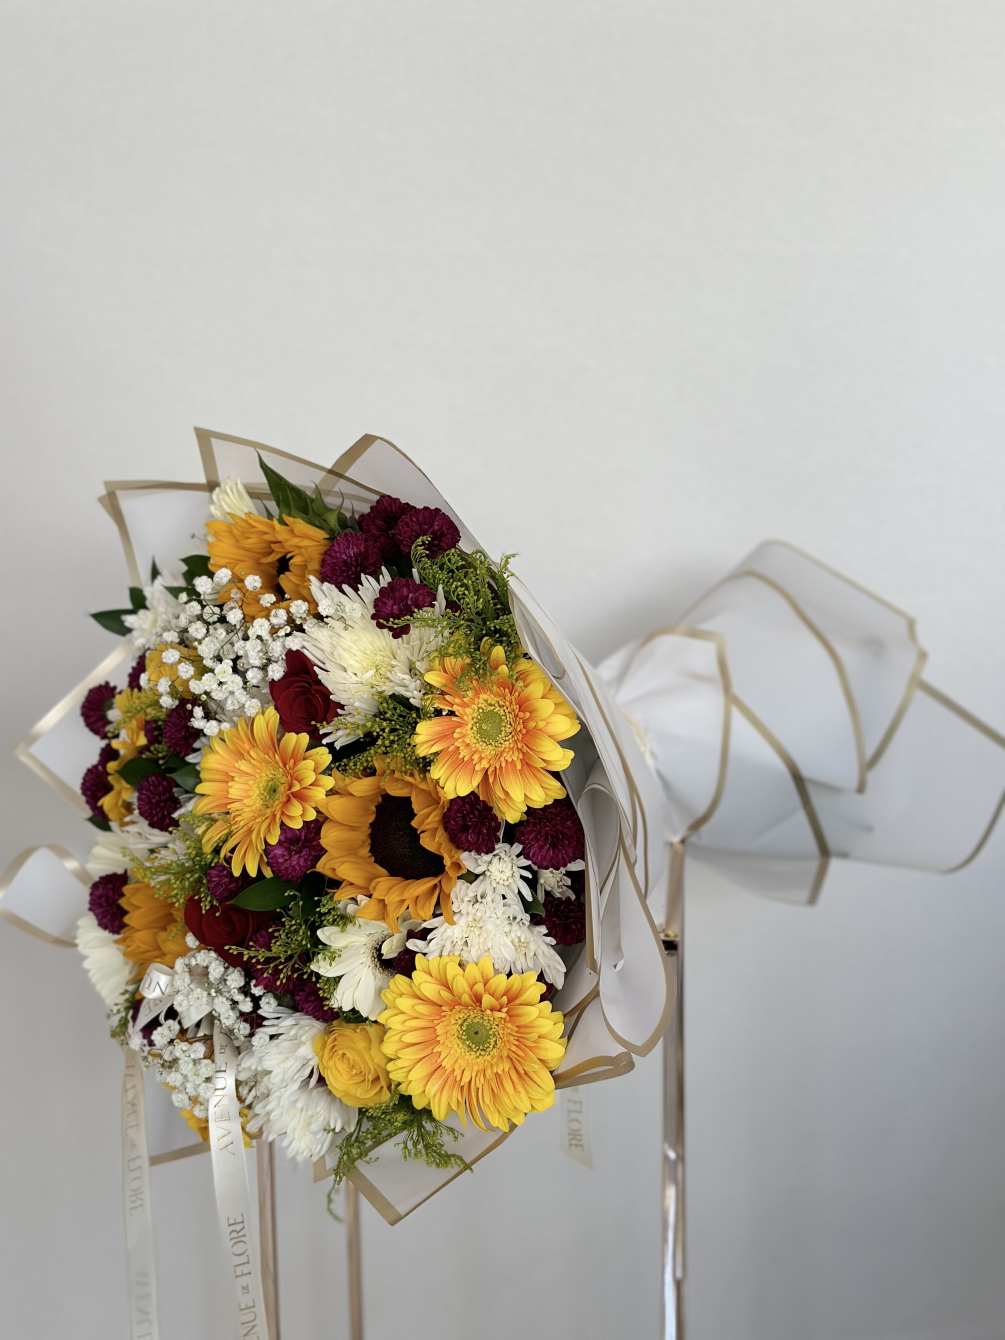 Introducing our &quot;Sunshine Bouquet&quot;&mdash;a burst of cheerful colors to brighten any day!